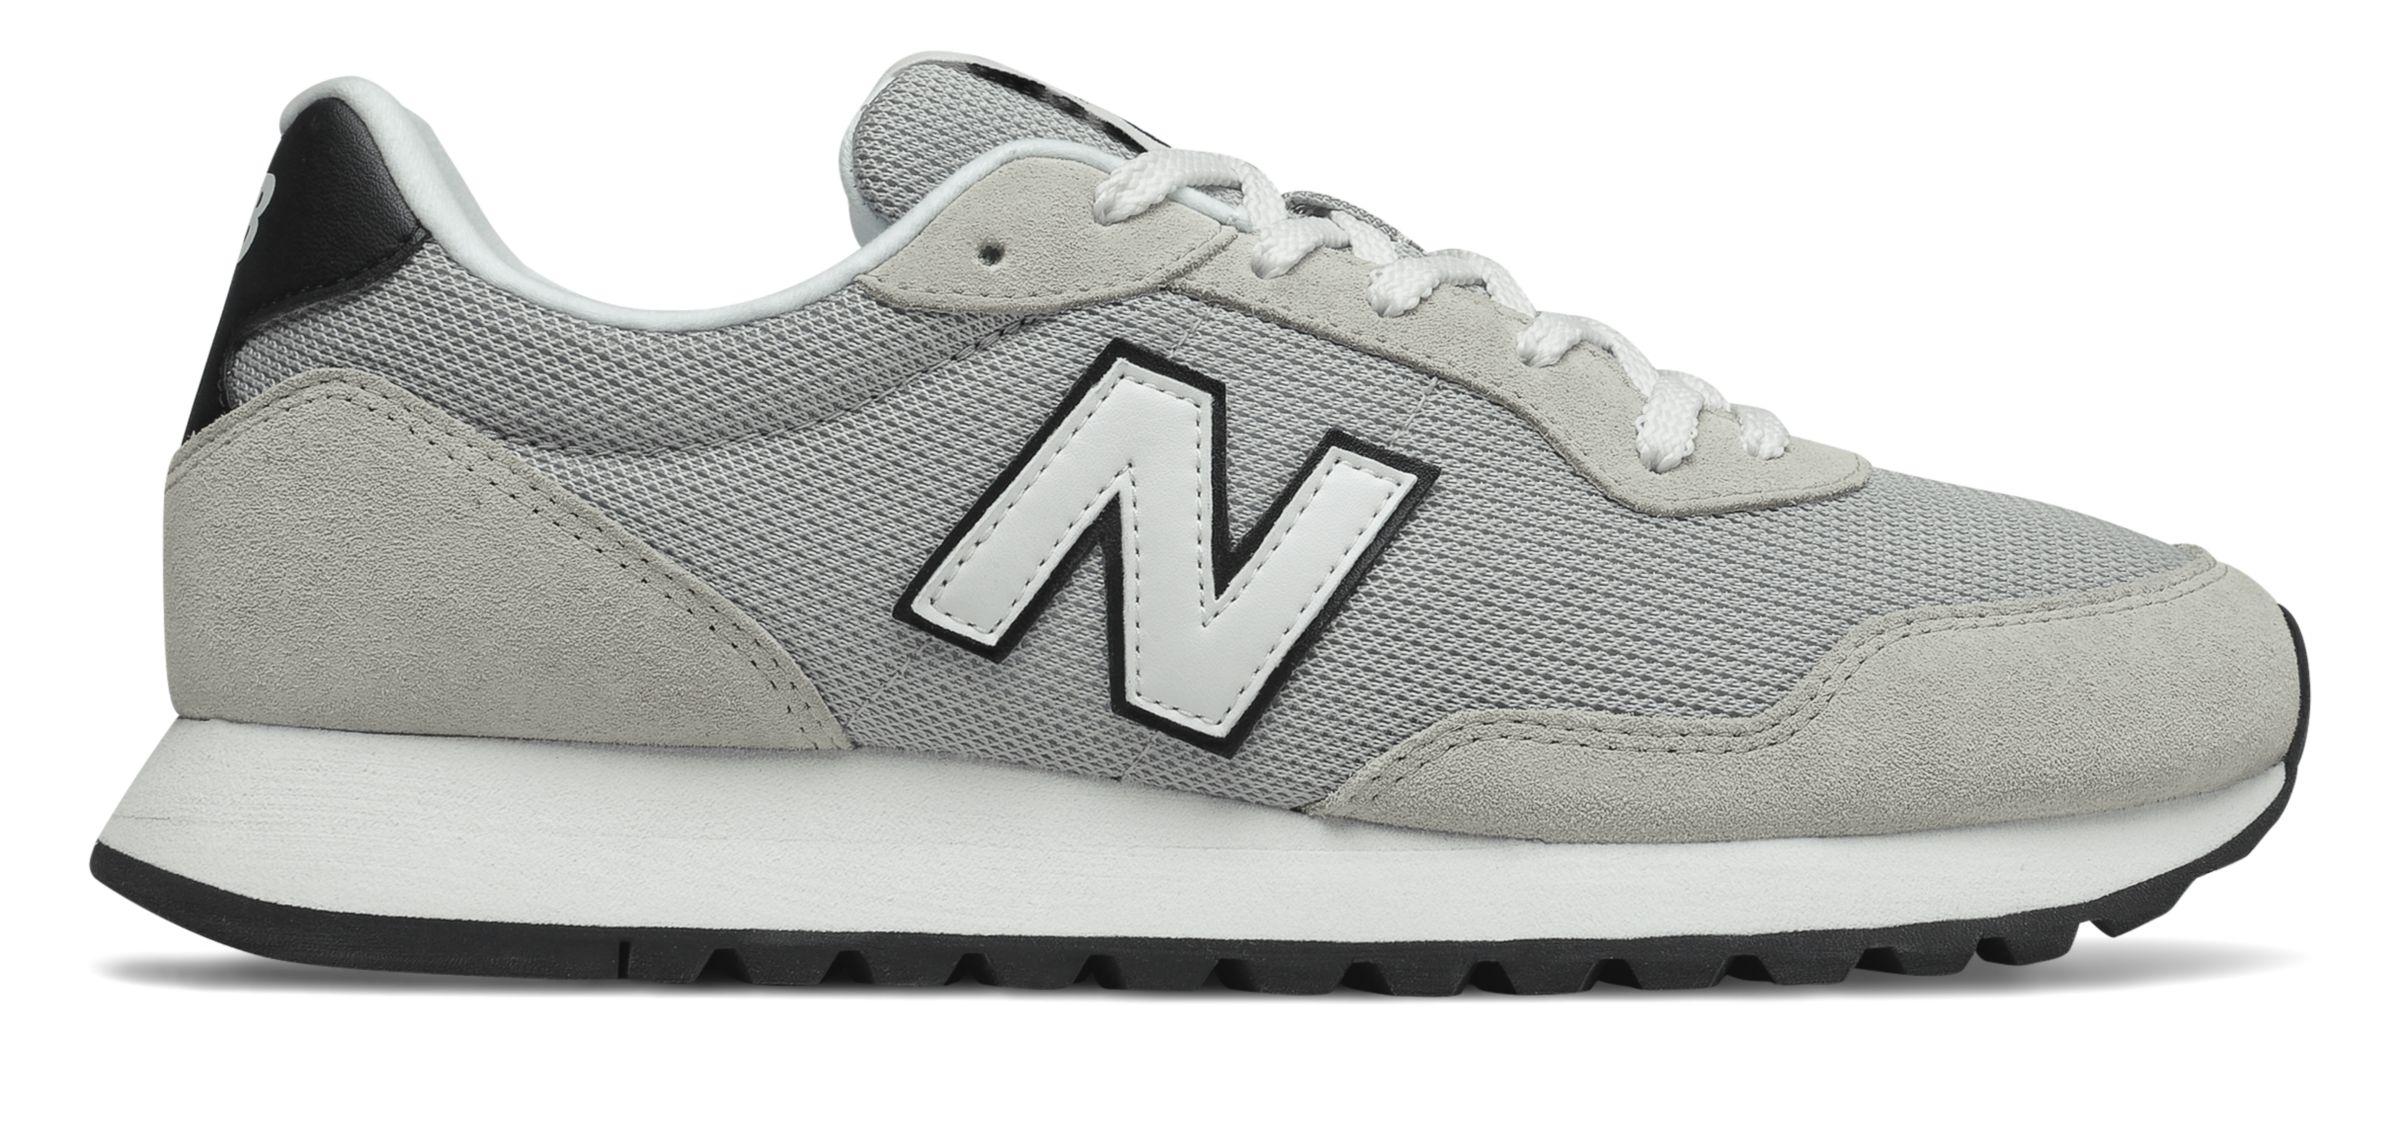 New Balance Suede 527 Casual Sneakers From Finish Line in Grey/Green (Gray)  for Men - Lyst